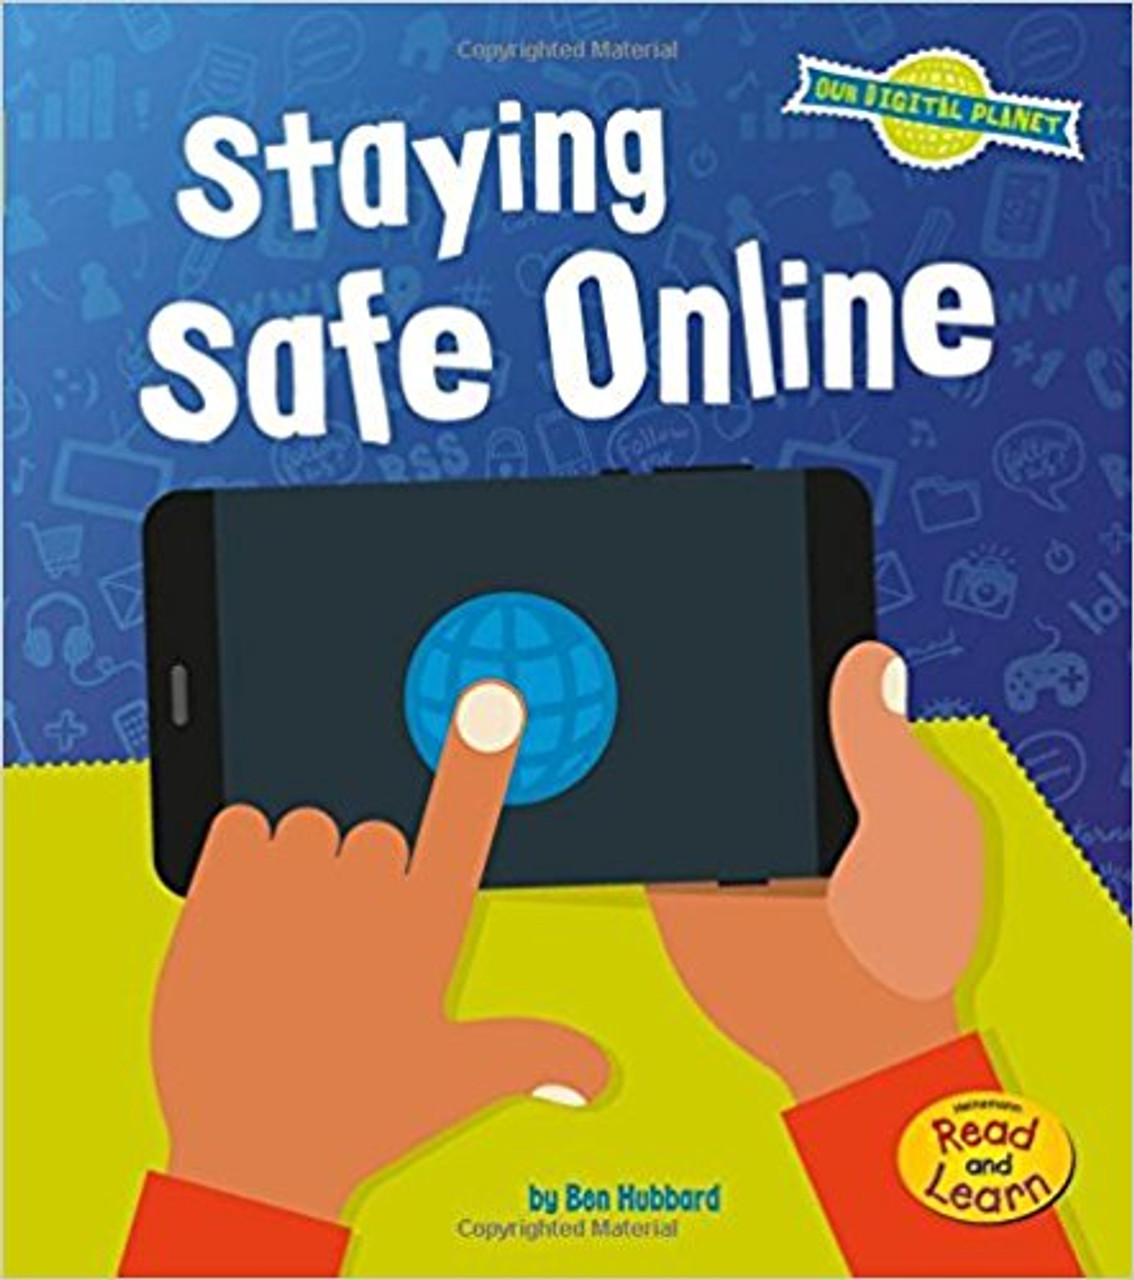 Staying Safe Online by Ben Hubbard